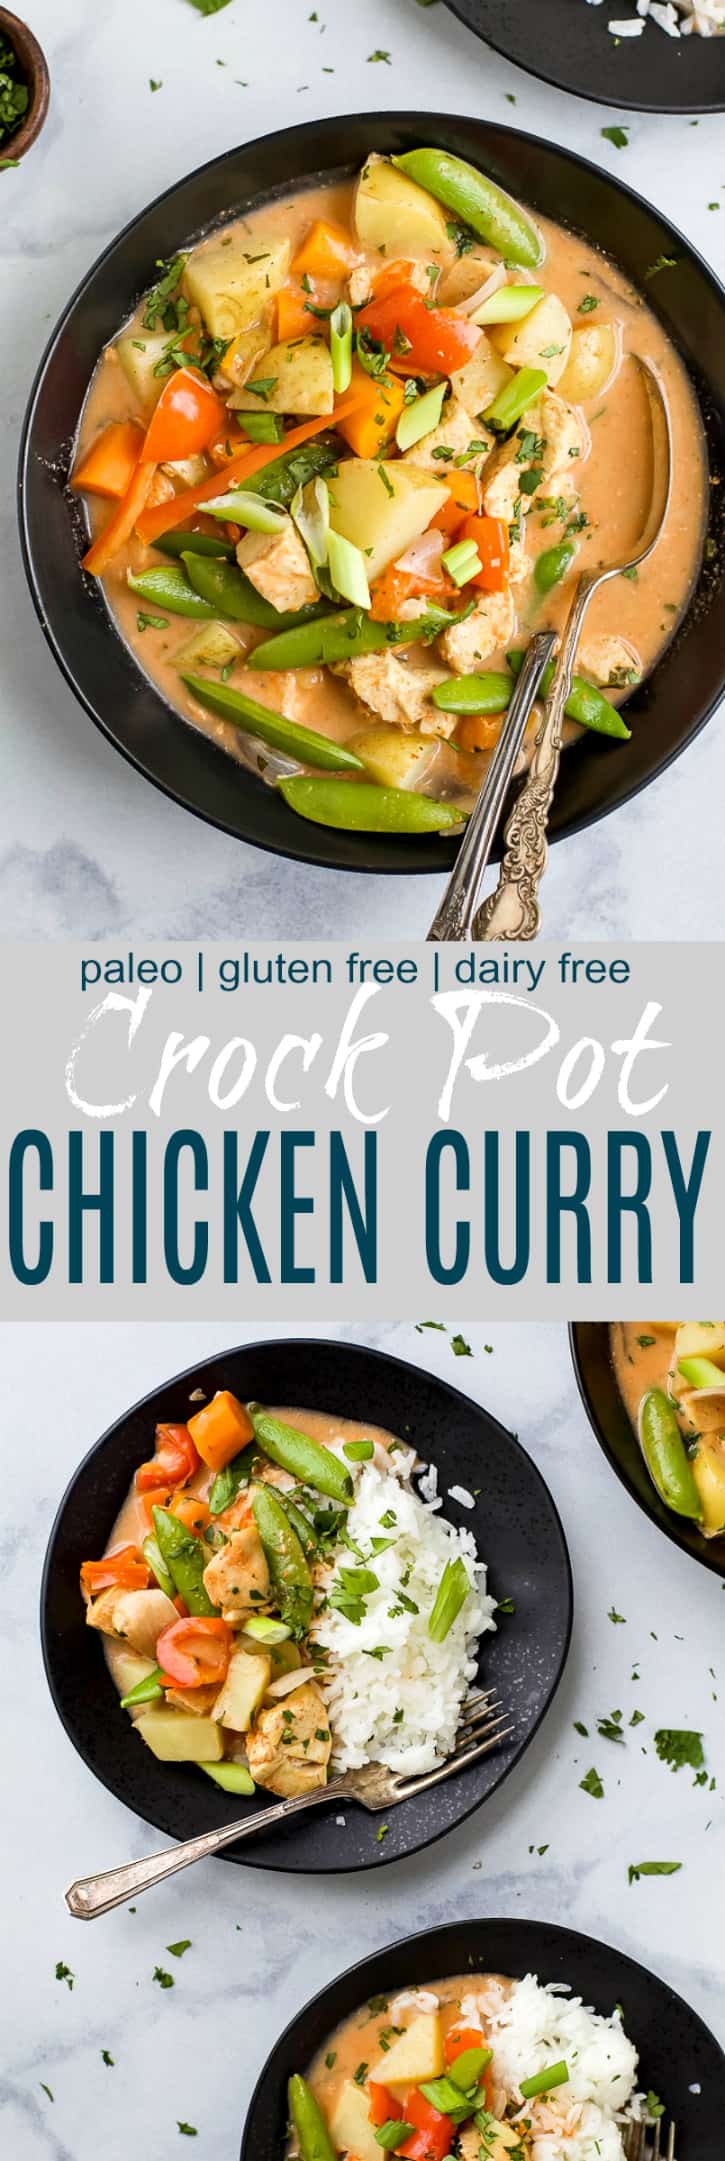 Recipe collage for Crock Pot Chicken Curry